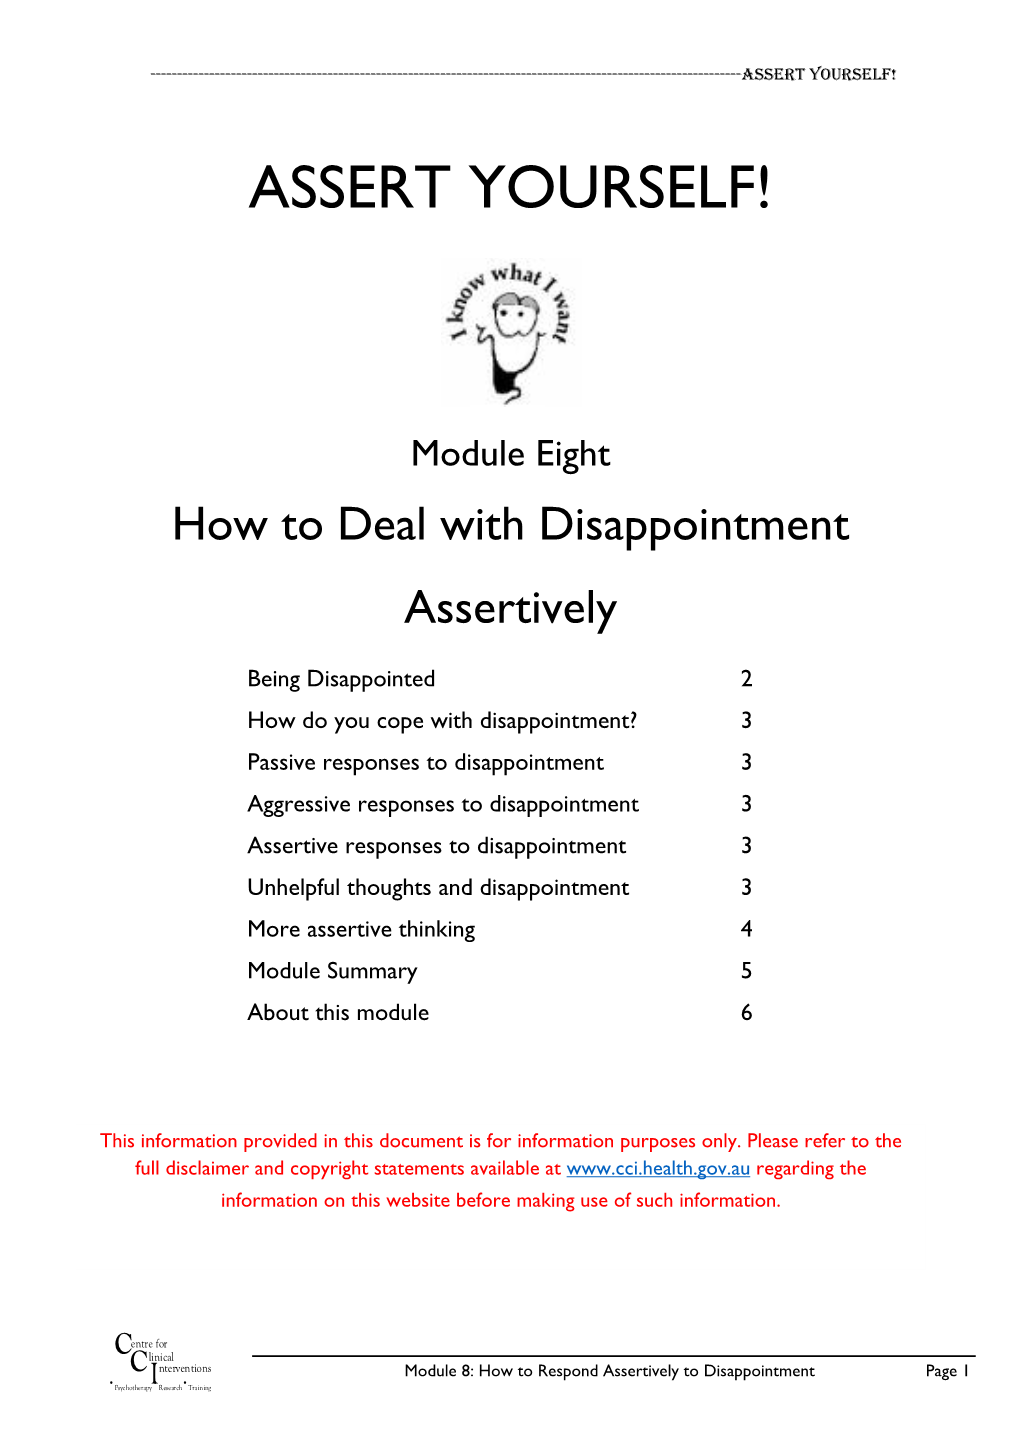 Module 8: How to Deal with Disappointment Assertively